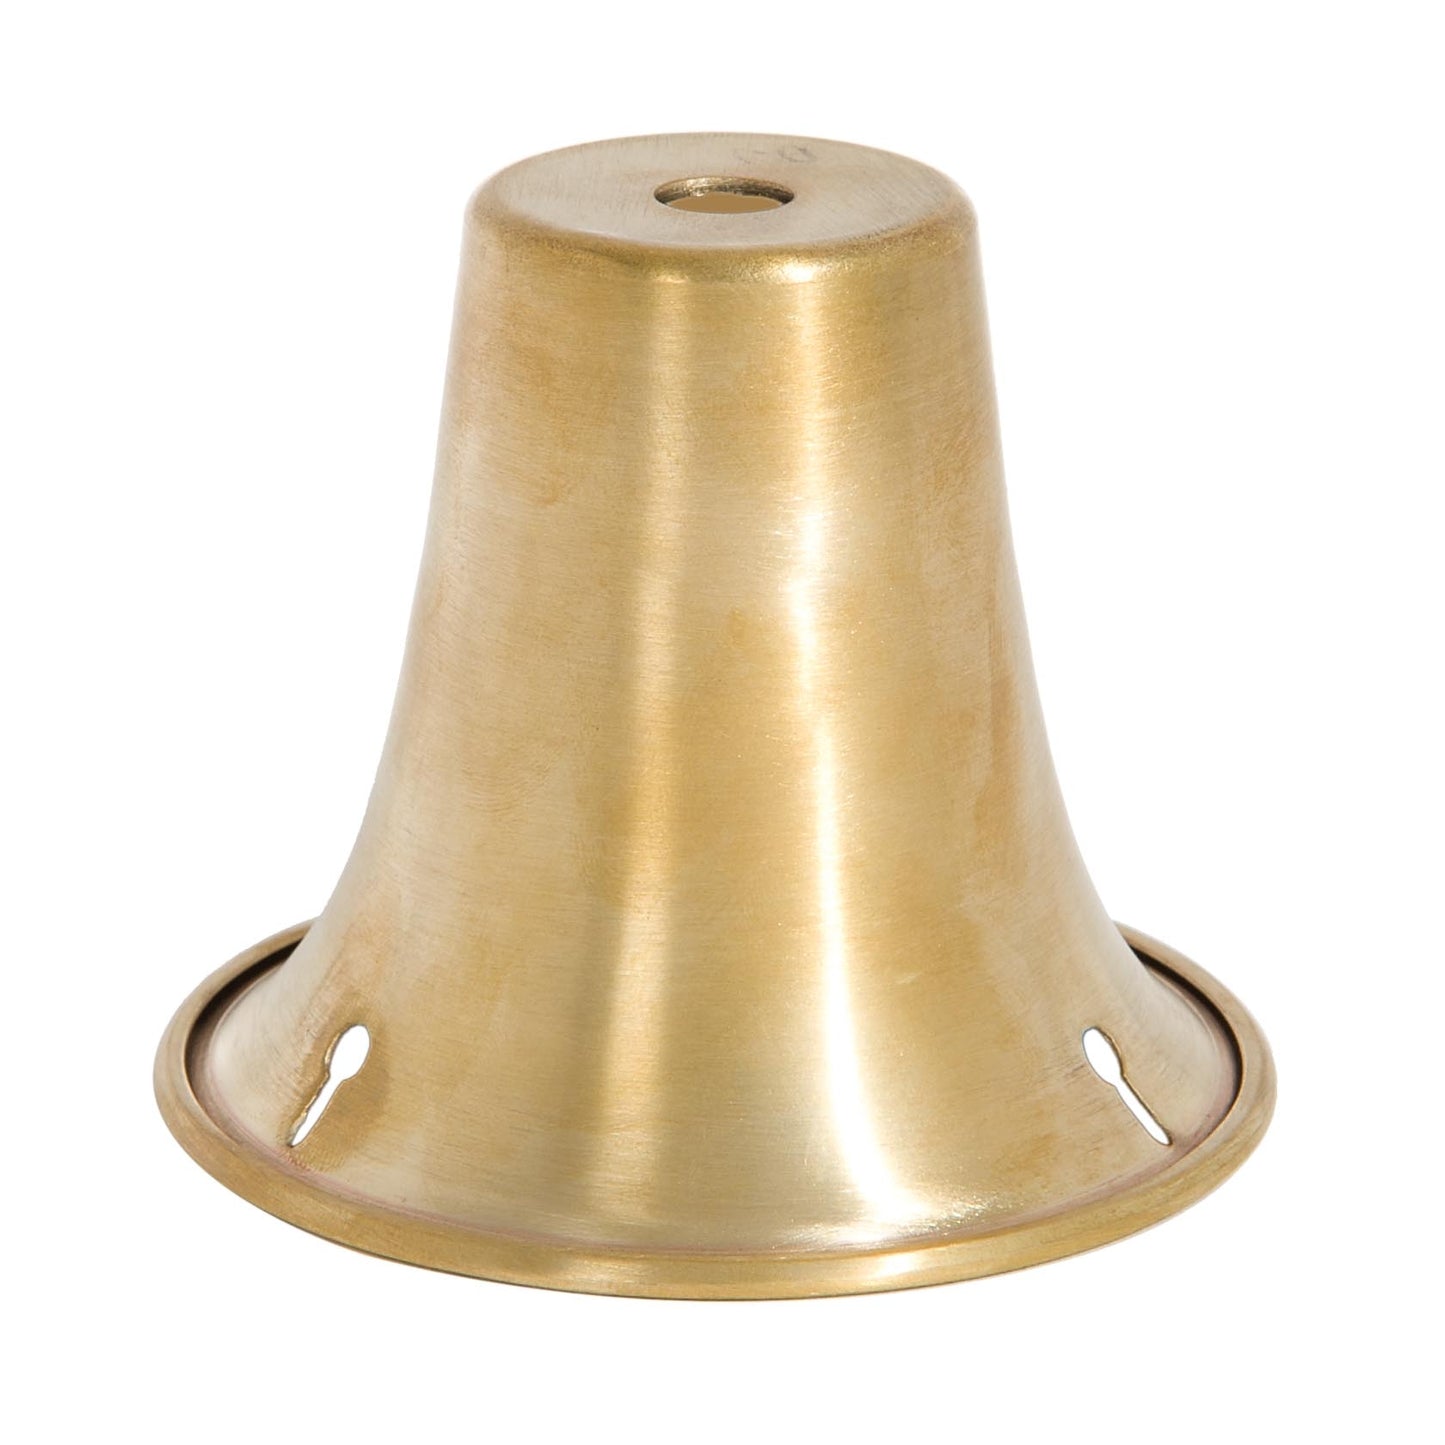 3-1/2 Inch Outer Diameter Unfinished Brass Bead-Chain Shade Holder, 1/8 IP Slip